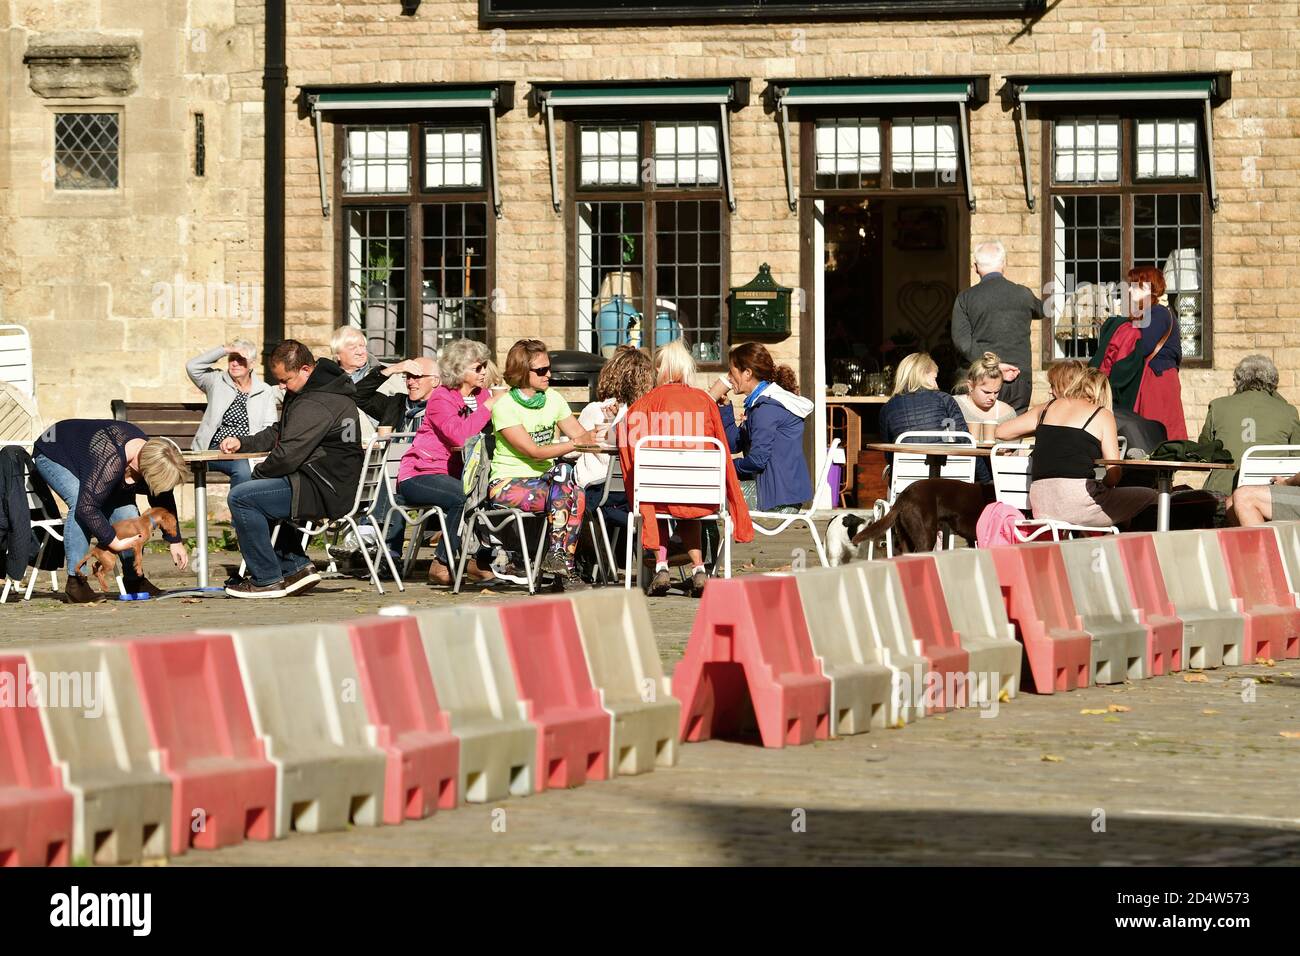 Wells, UK. 11th Oct, 2020. 11/October 2020. The New Normal, covid-19 eating out with red and white barriers separating people for social distancing at the City of Wells in Somerset on a warm and mild afternoon in October. Picture Credit: Robert Timoney/Alamy Live News Stock Photo